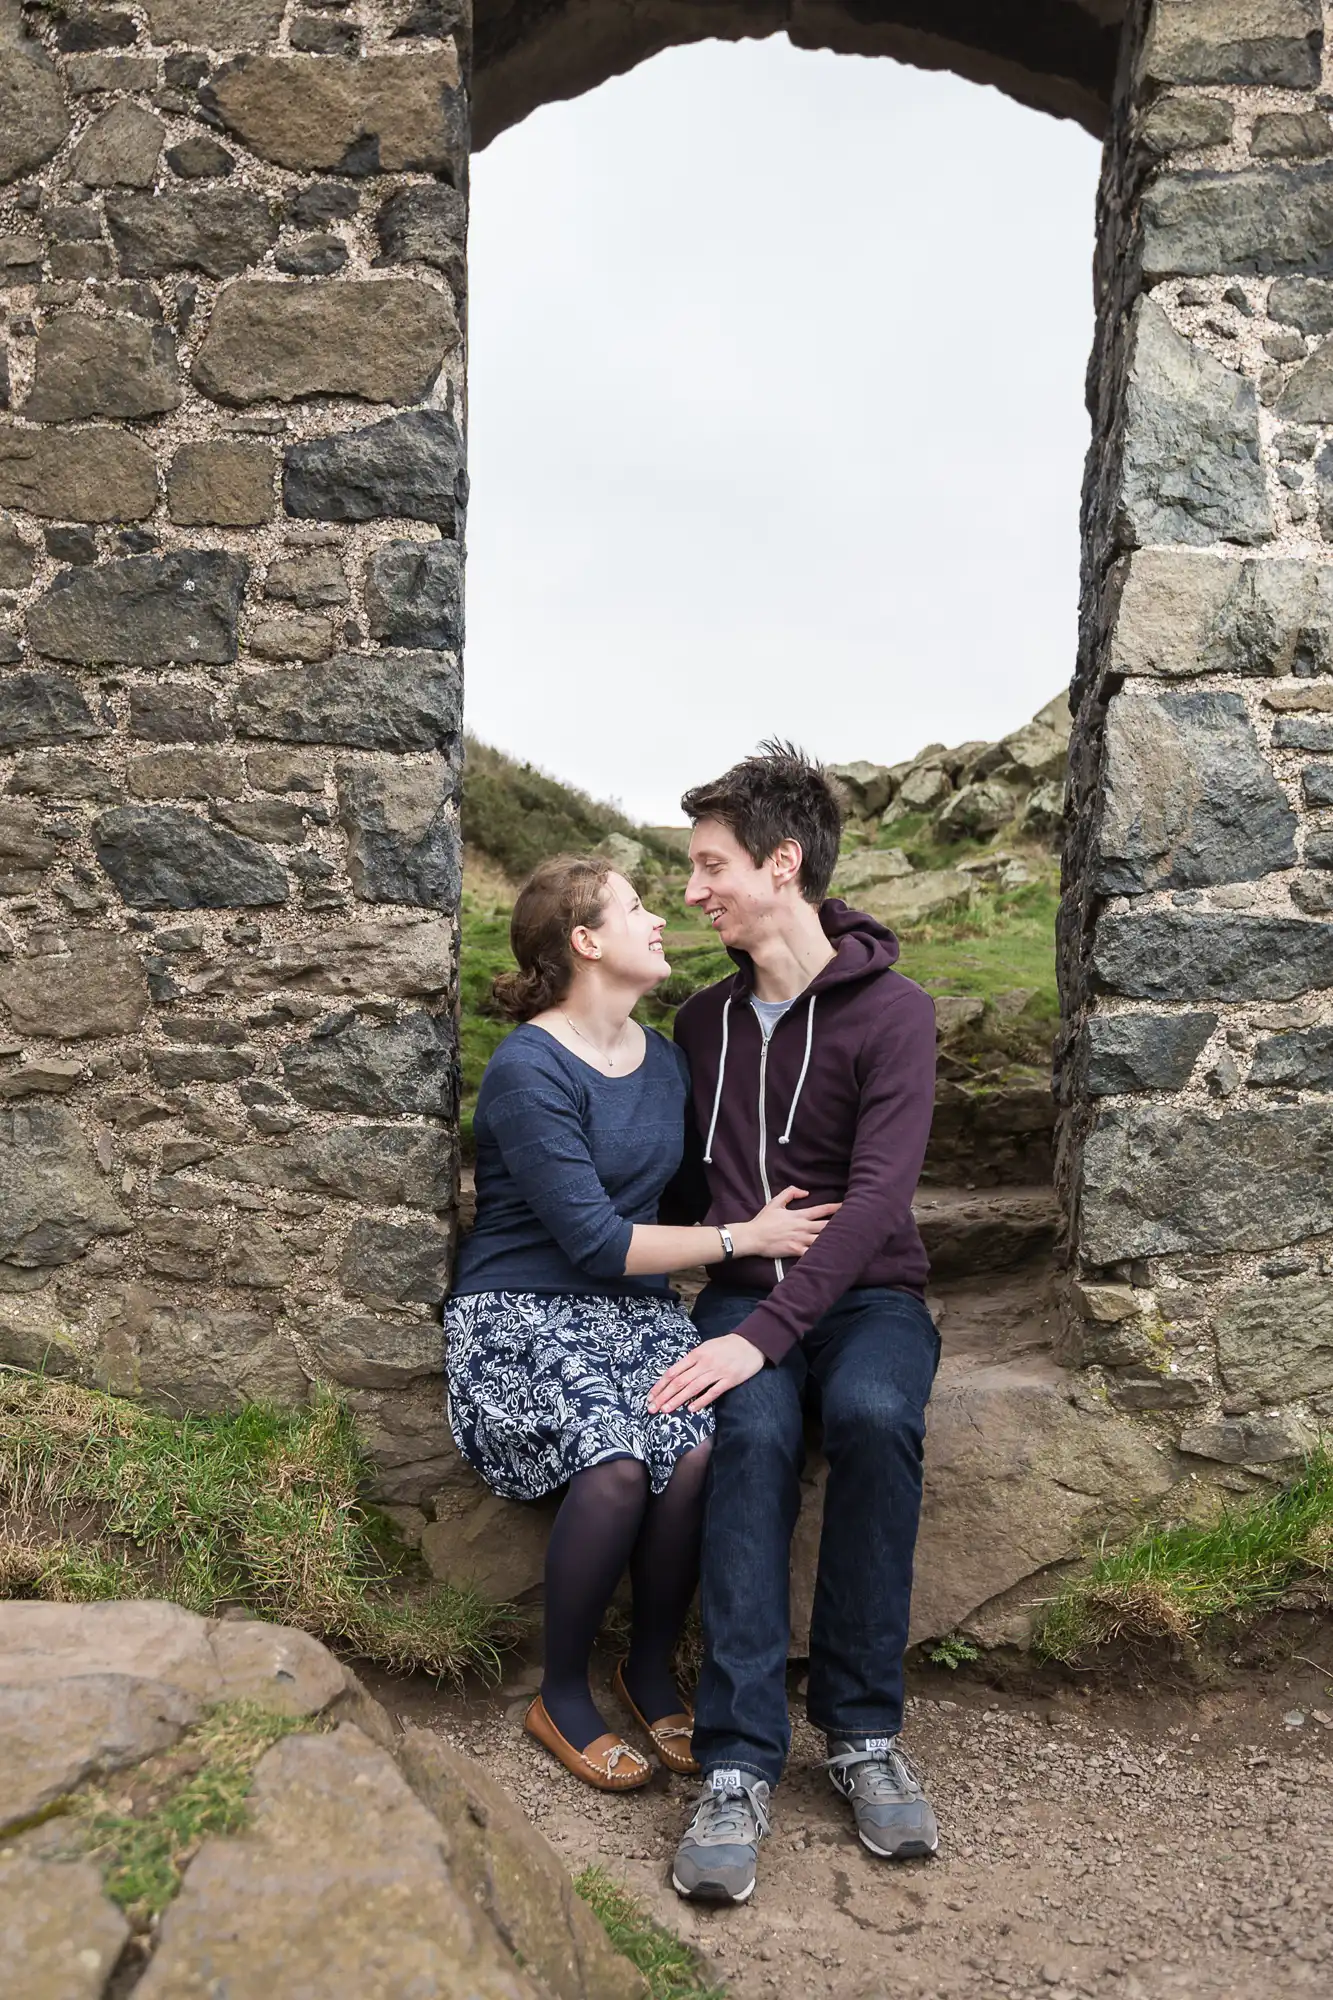 A couple sitting in a stone archway lovingly looking at each other, with a grassy hill in the background.